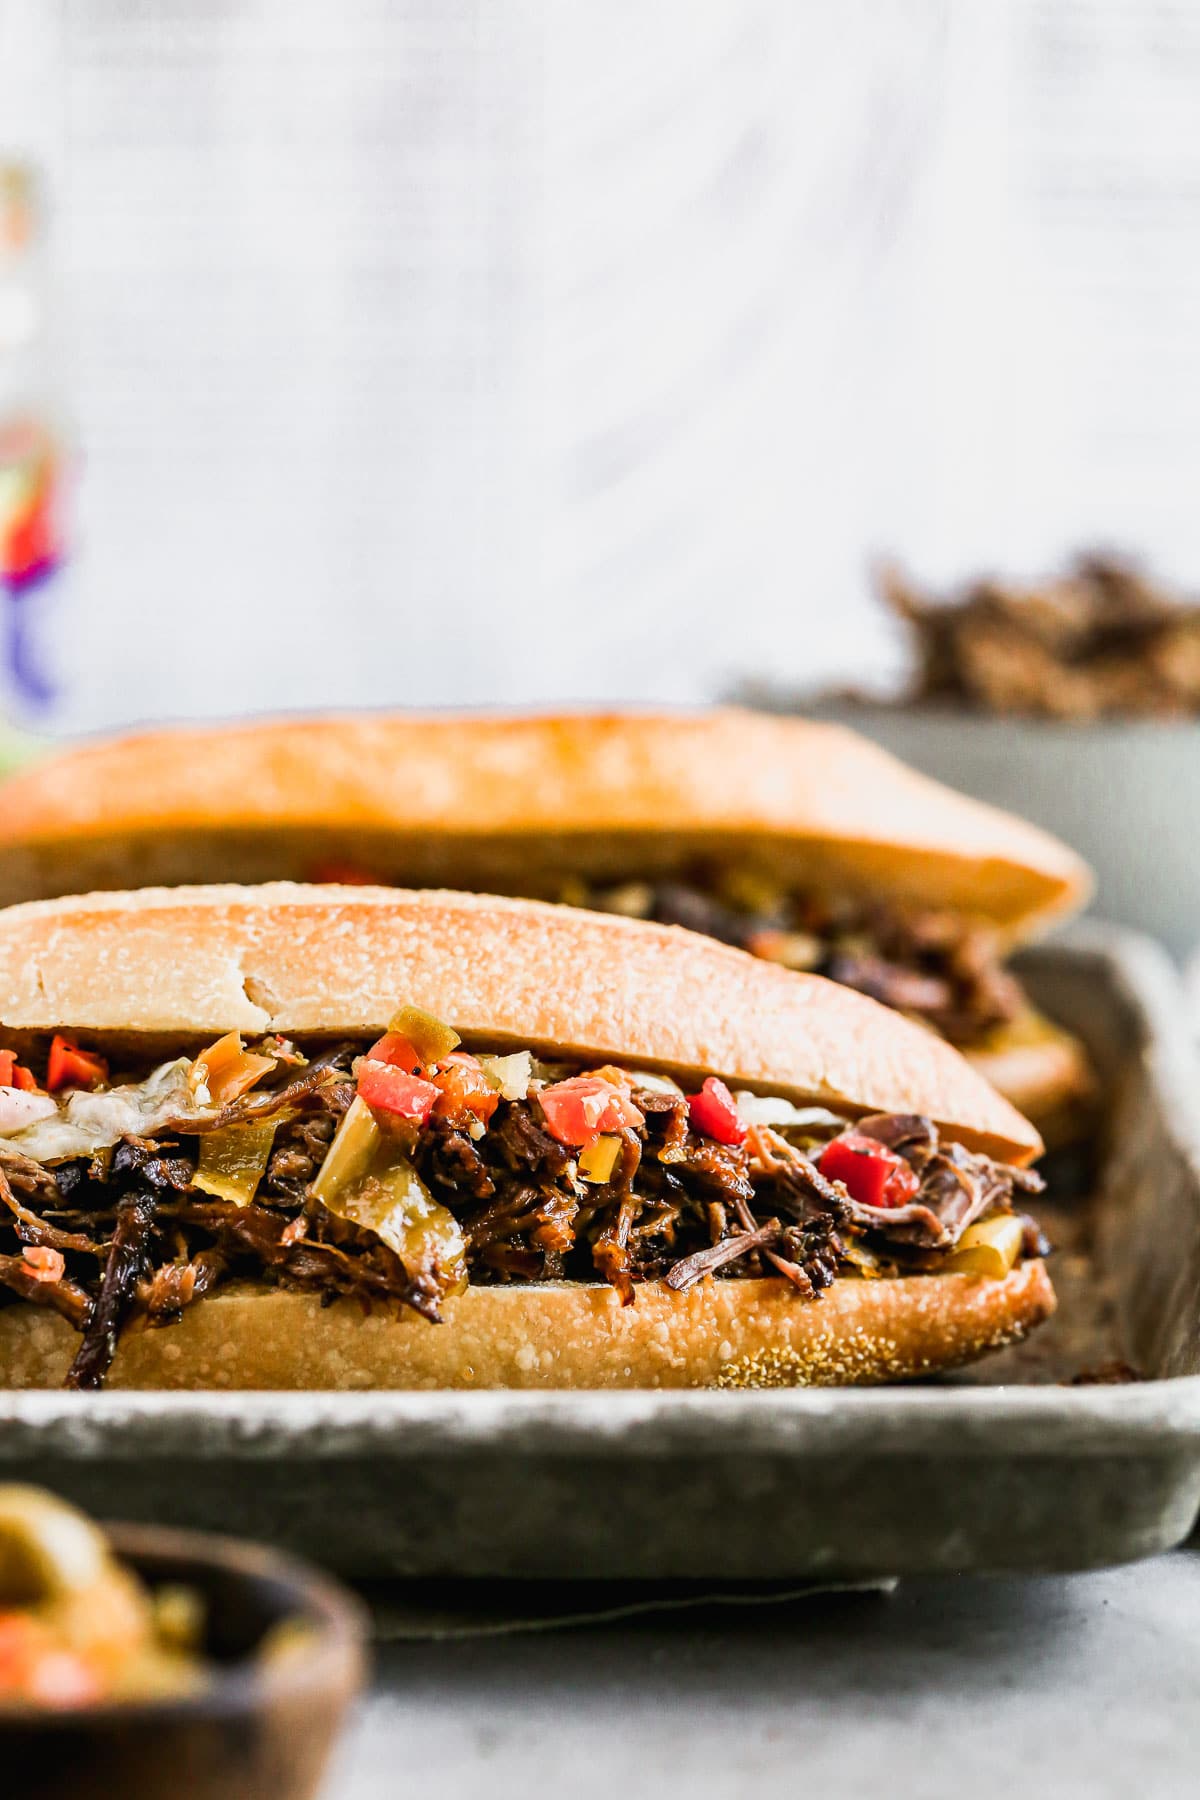 A sandwich of Italian beef with cheese